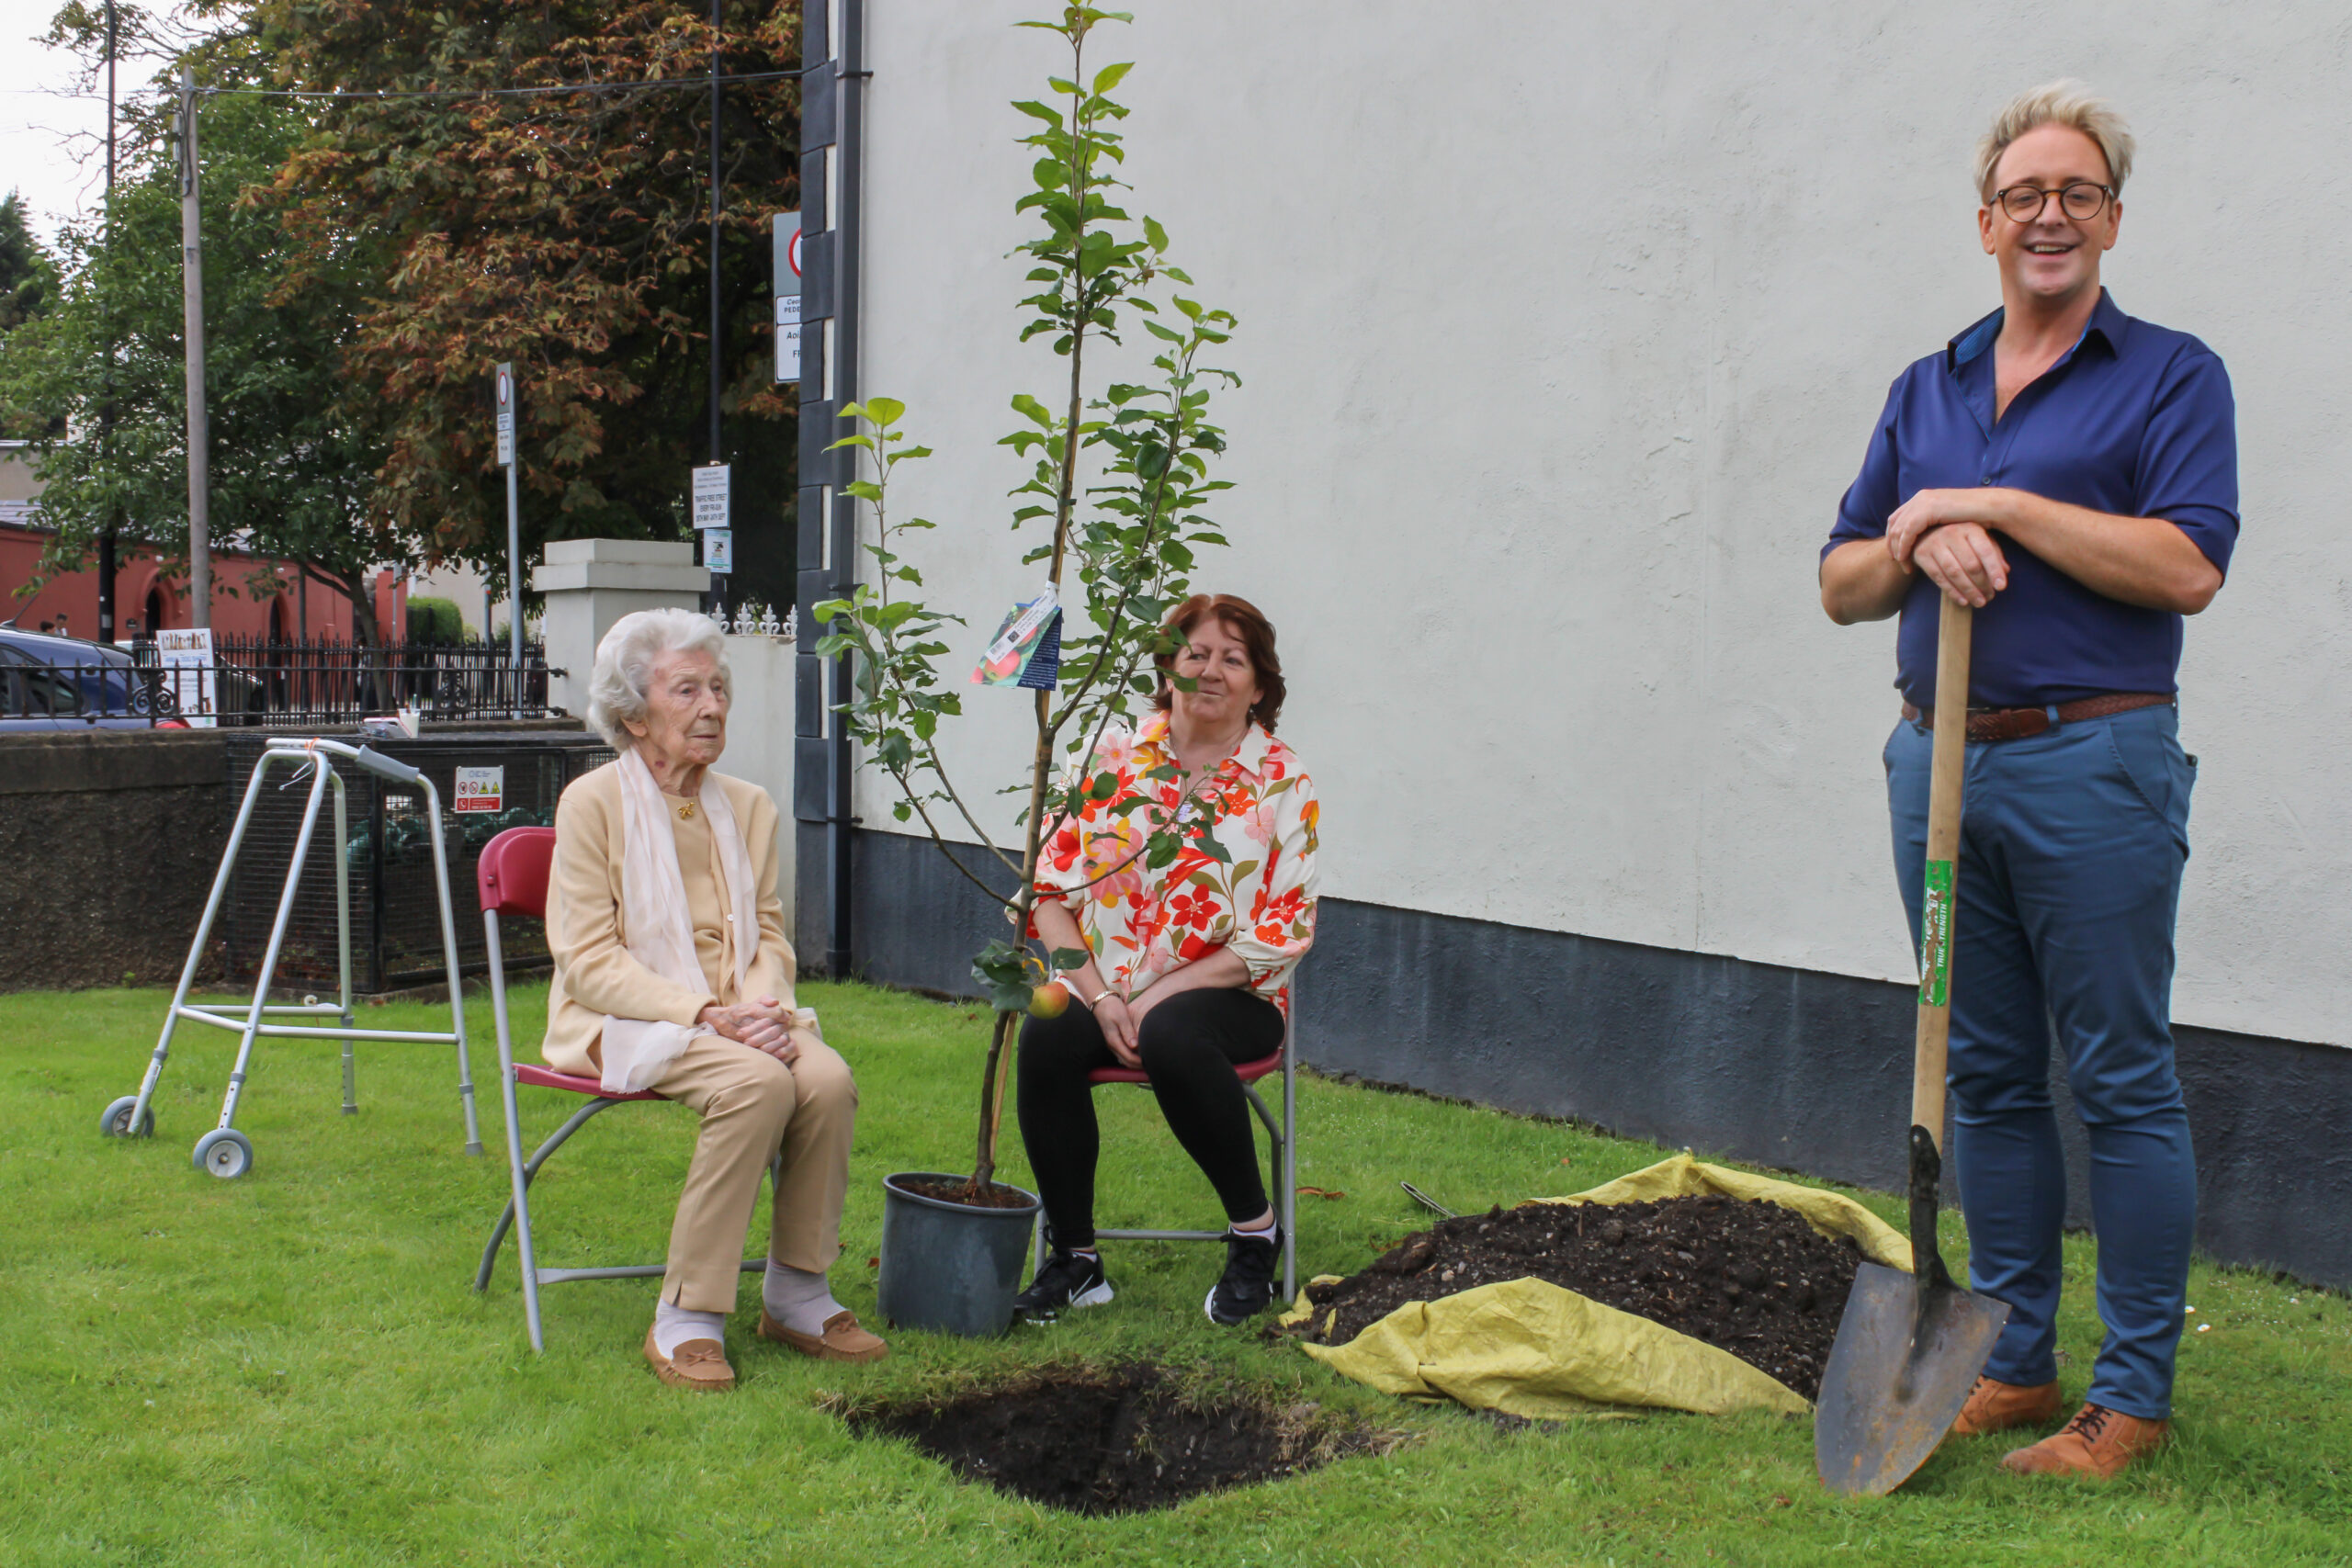 Tree planting ceremony. Colin leaning on his shovel while Dorie and Bernie do all the hard work.